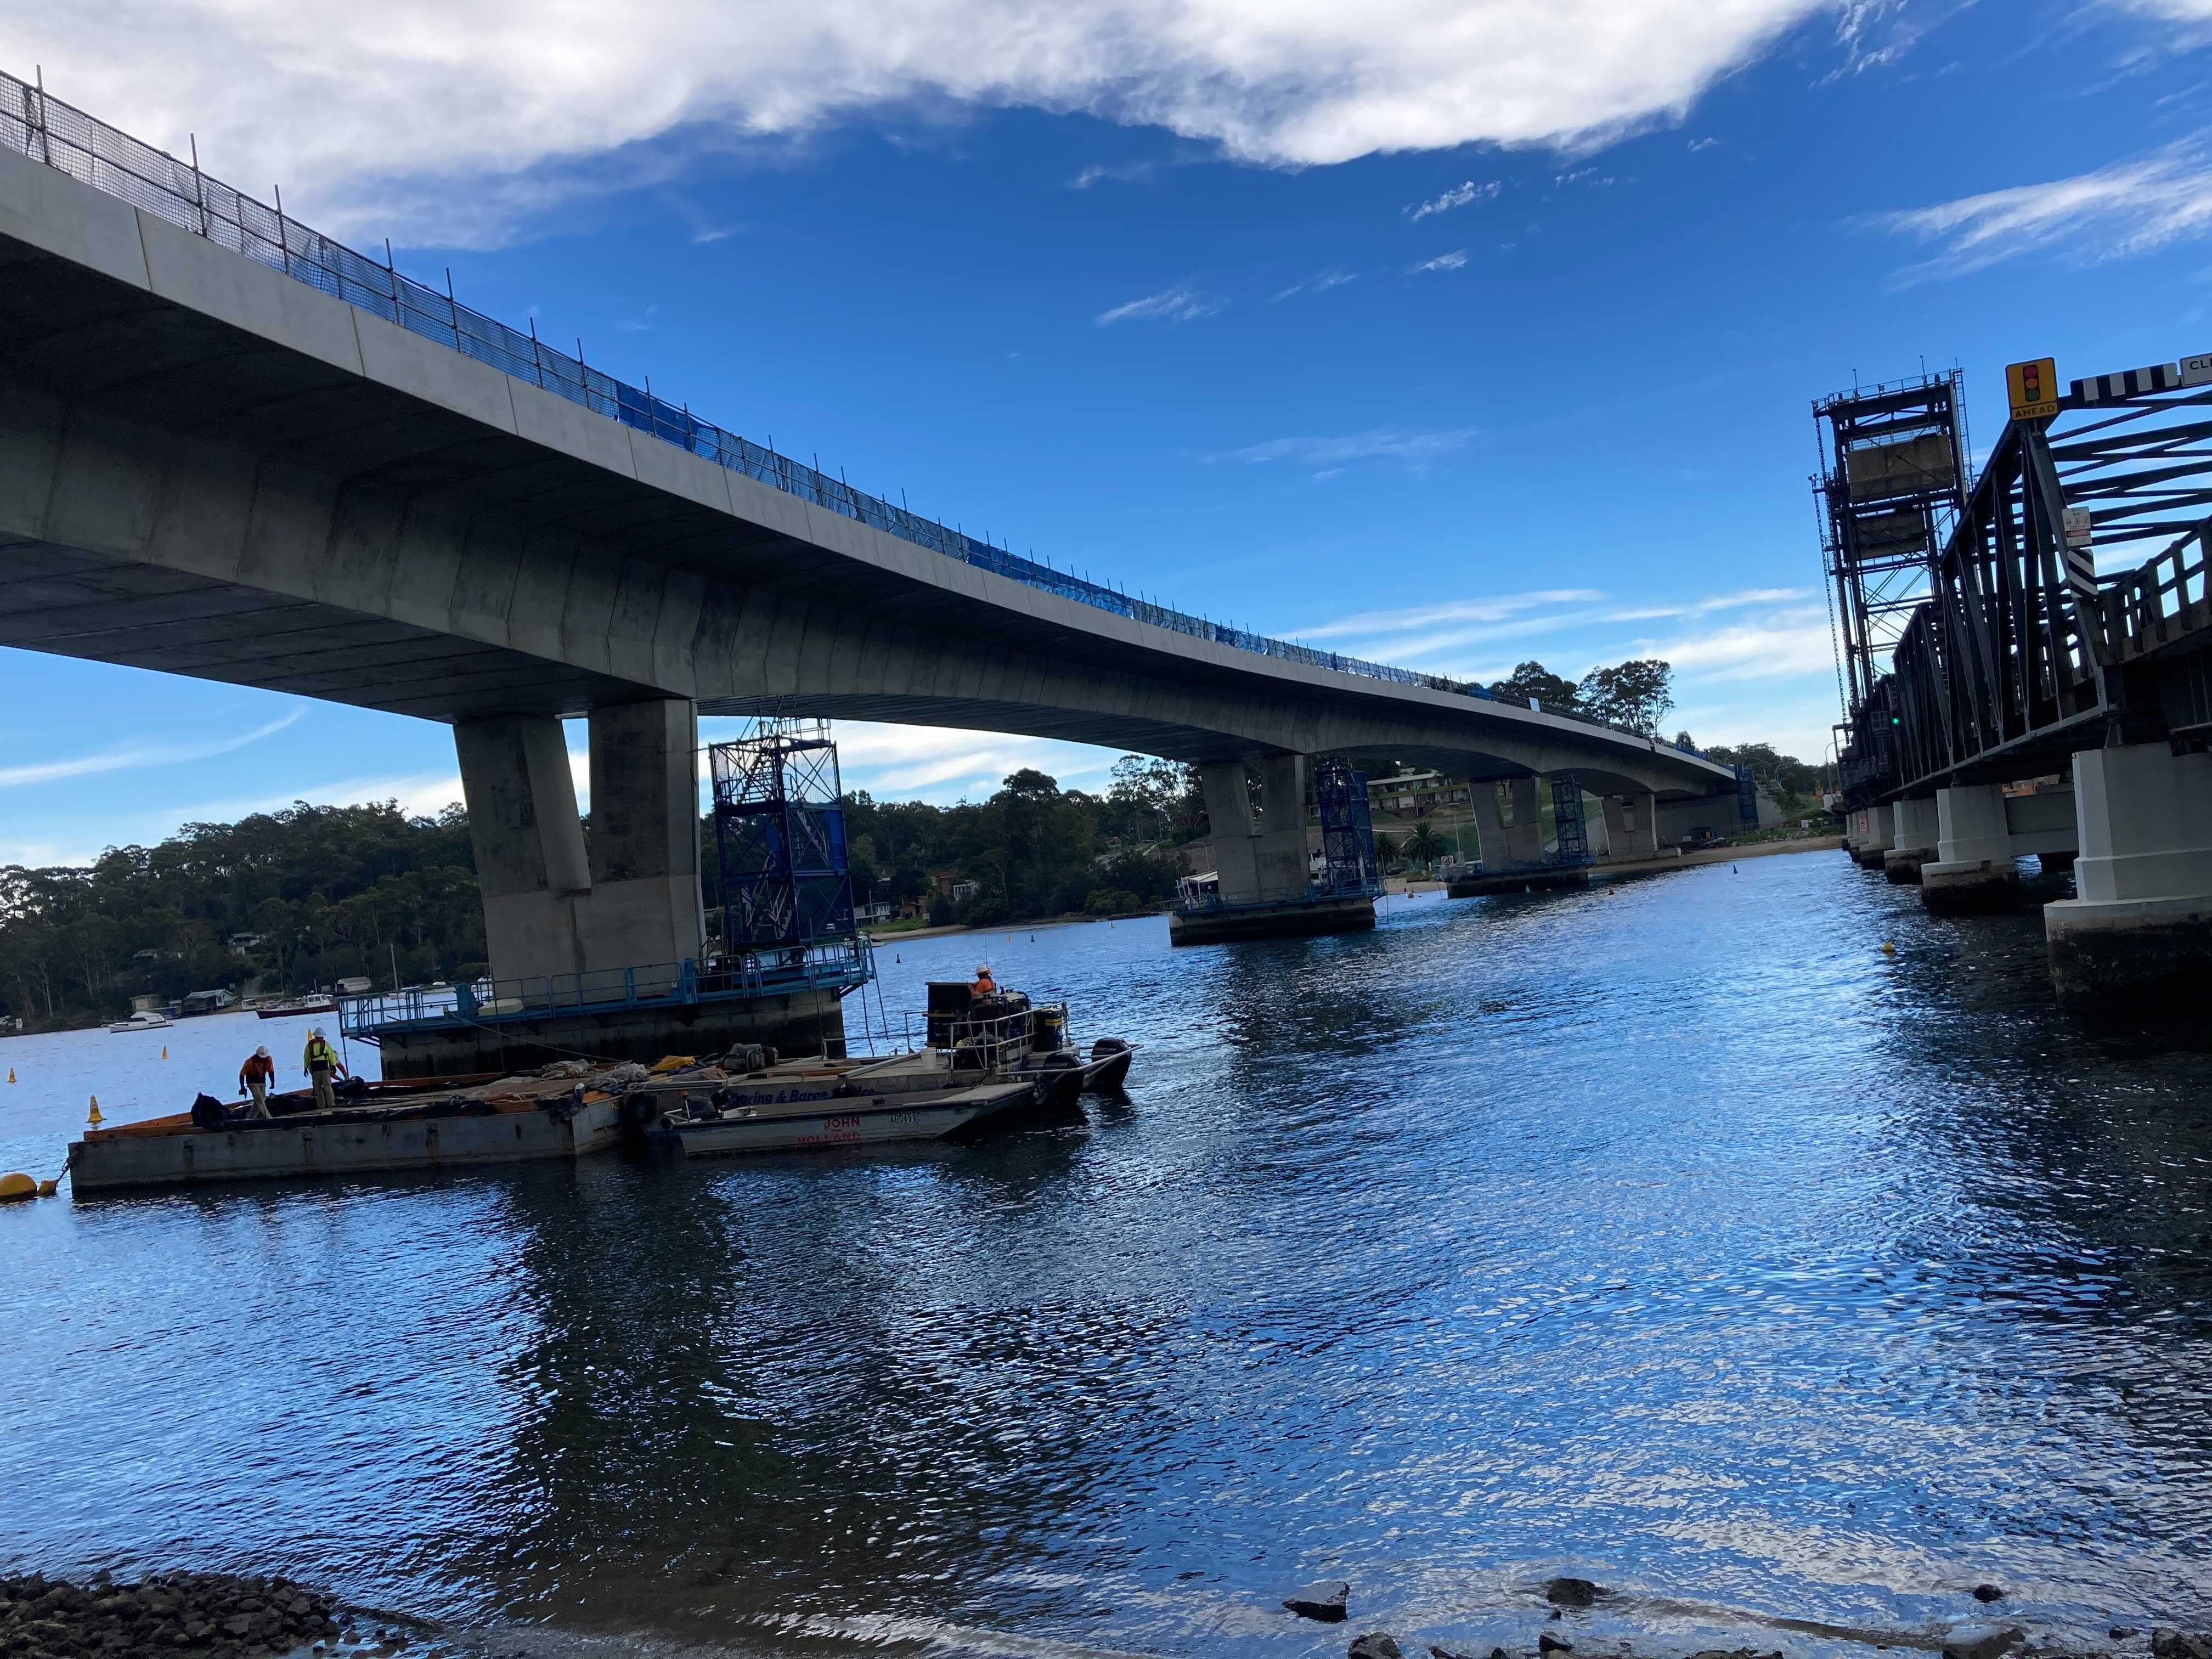 All lanes of new Batemans Bay bridge unlikely to be open for some time